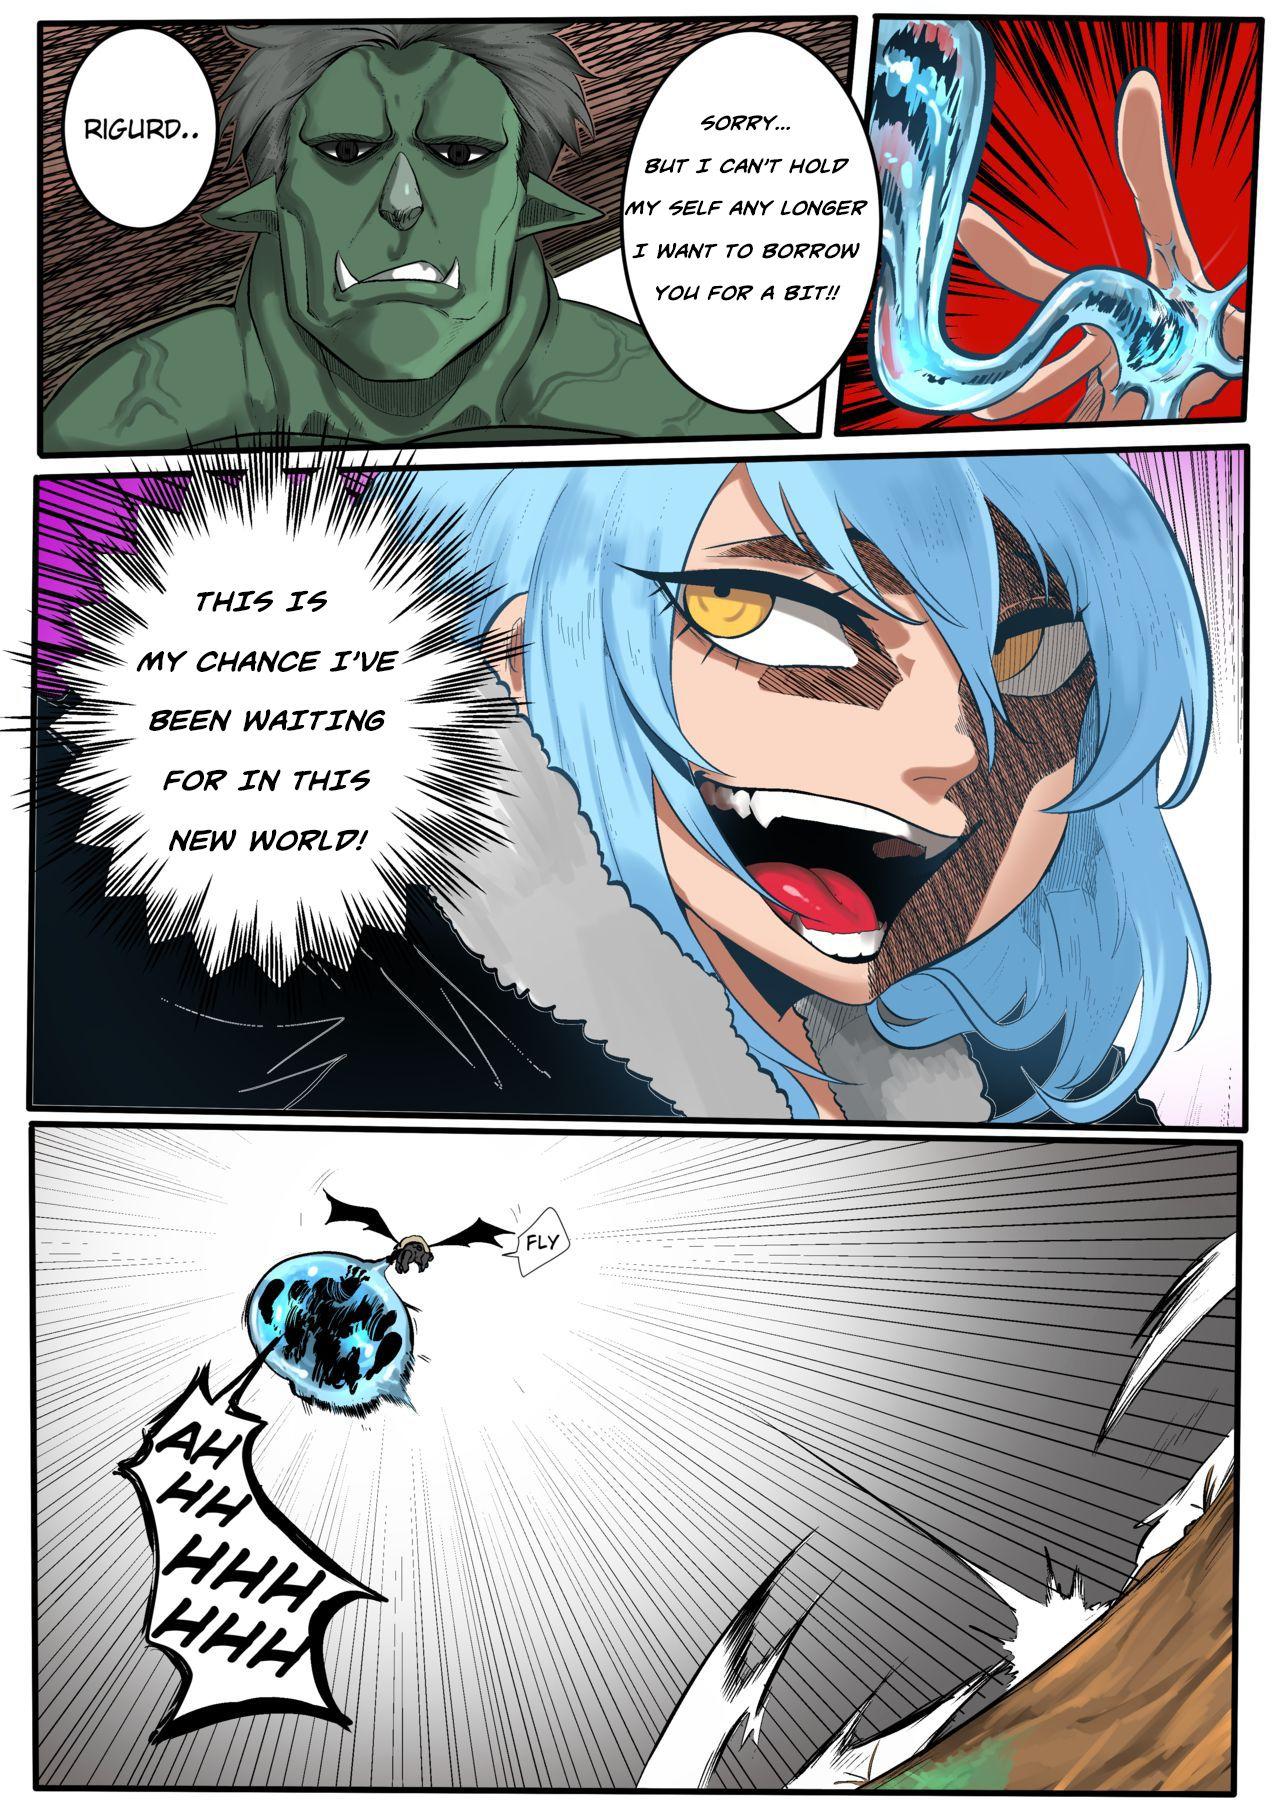 Blowjobs That Time I Got Reincarnated as a Bitchy Slime - Tensei shitara slime datta ken Young Old - Page 6